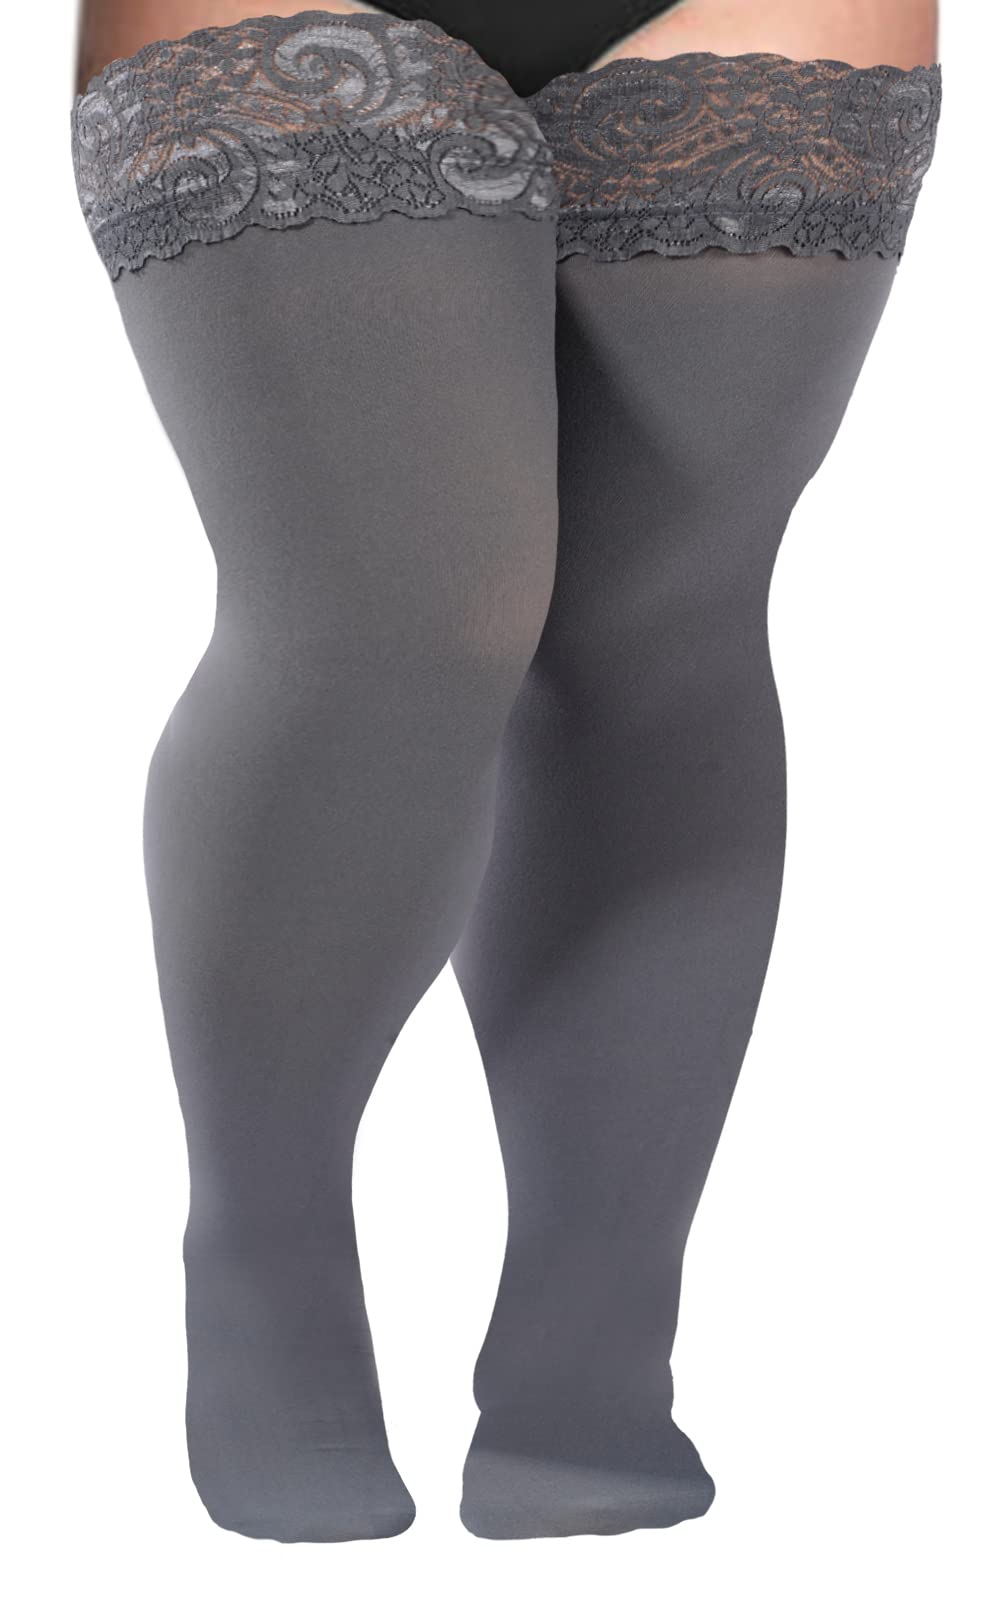 55D Semi Sheer Silicone Lace Stay Up Thigh Highs Pantyhose-Dark Grey - Moon Wood